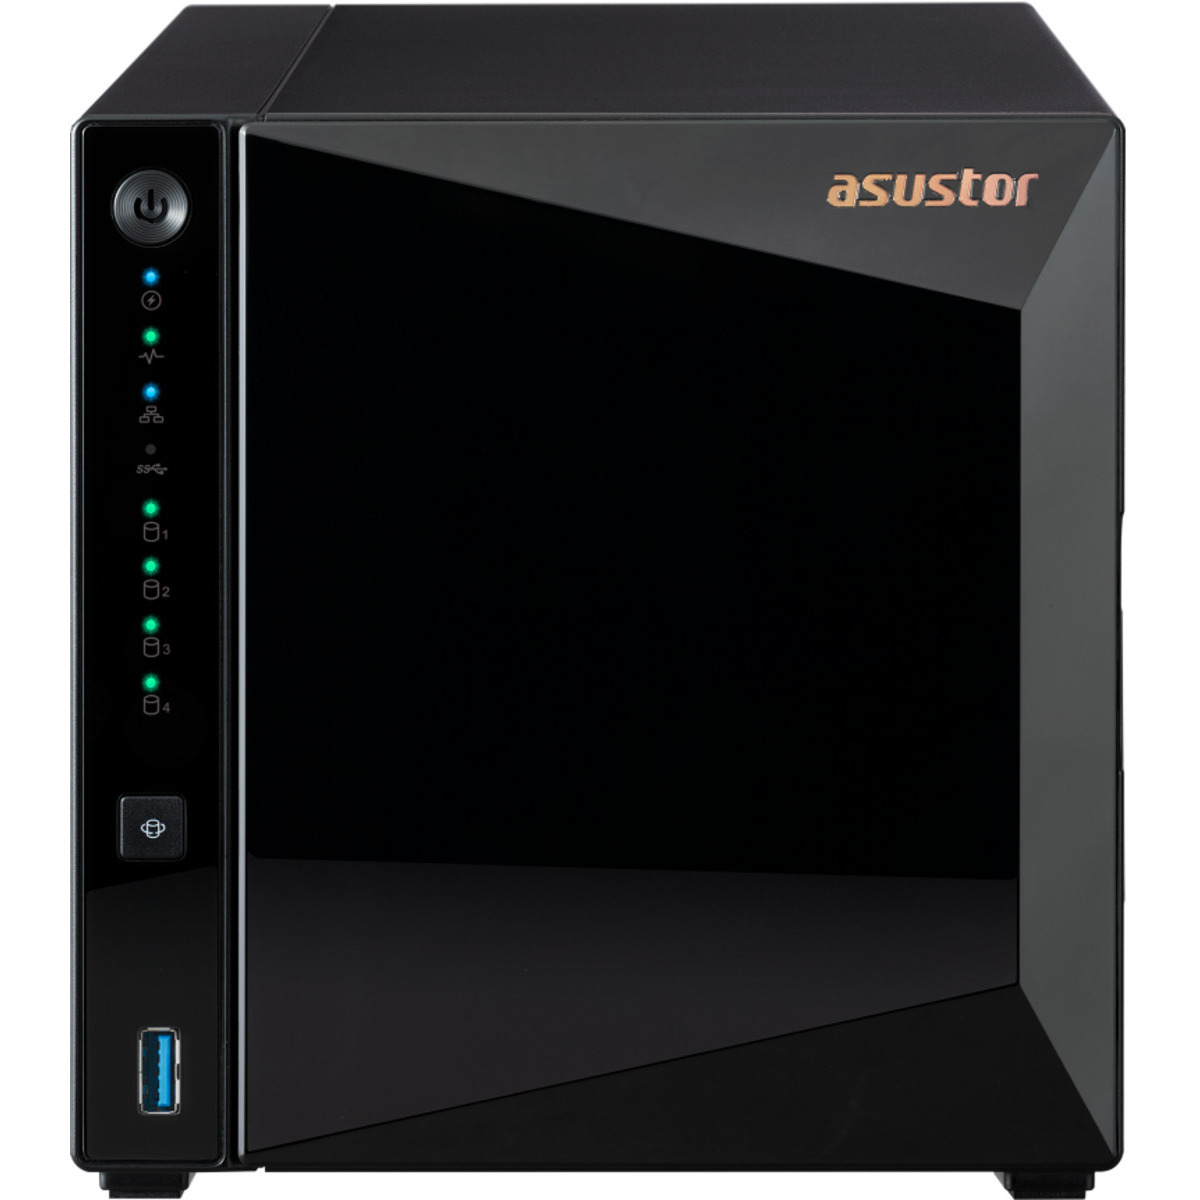 buy ASUSTOR DRIVESTOR 4 Pro Gen2 AS3304T v2 64tb Desktop NAS - Network Attached Storage Device 4x16000gb Seagate EXOS X18 ST16000NM000J 3.5 7200rpm SATA 6Gb/s HDD ENTERPRISE Class Drives Installed - Burn-In Tested - nas headquarters buy network attached storage server device das new raid-5 free shipping usa spring sale DRIVESTOR 4 Pro Gen2 AS3304T v2